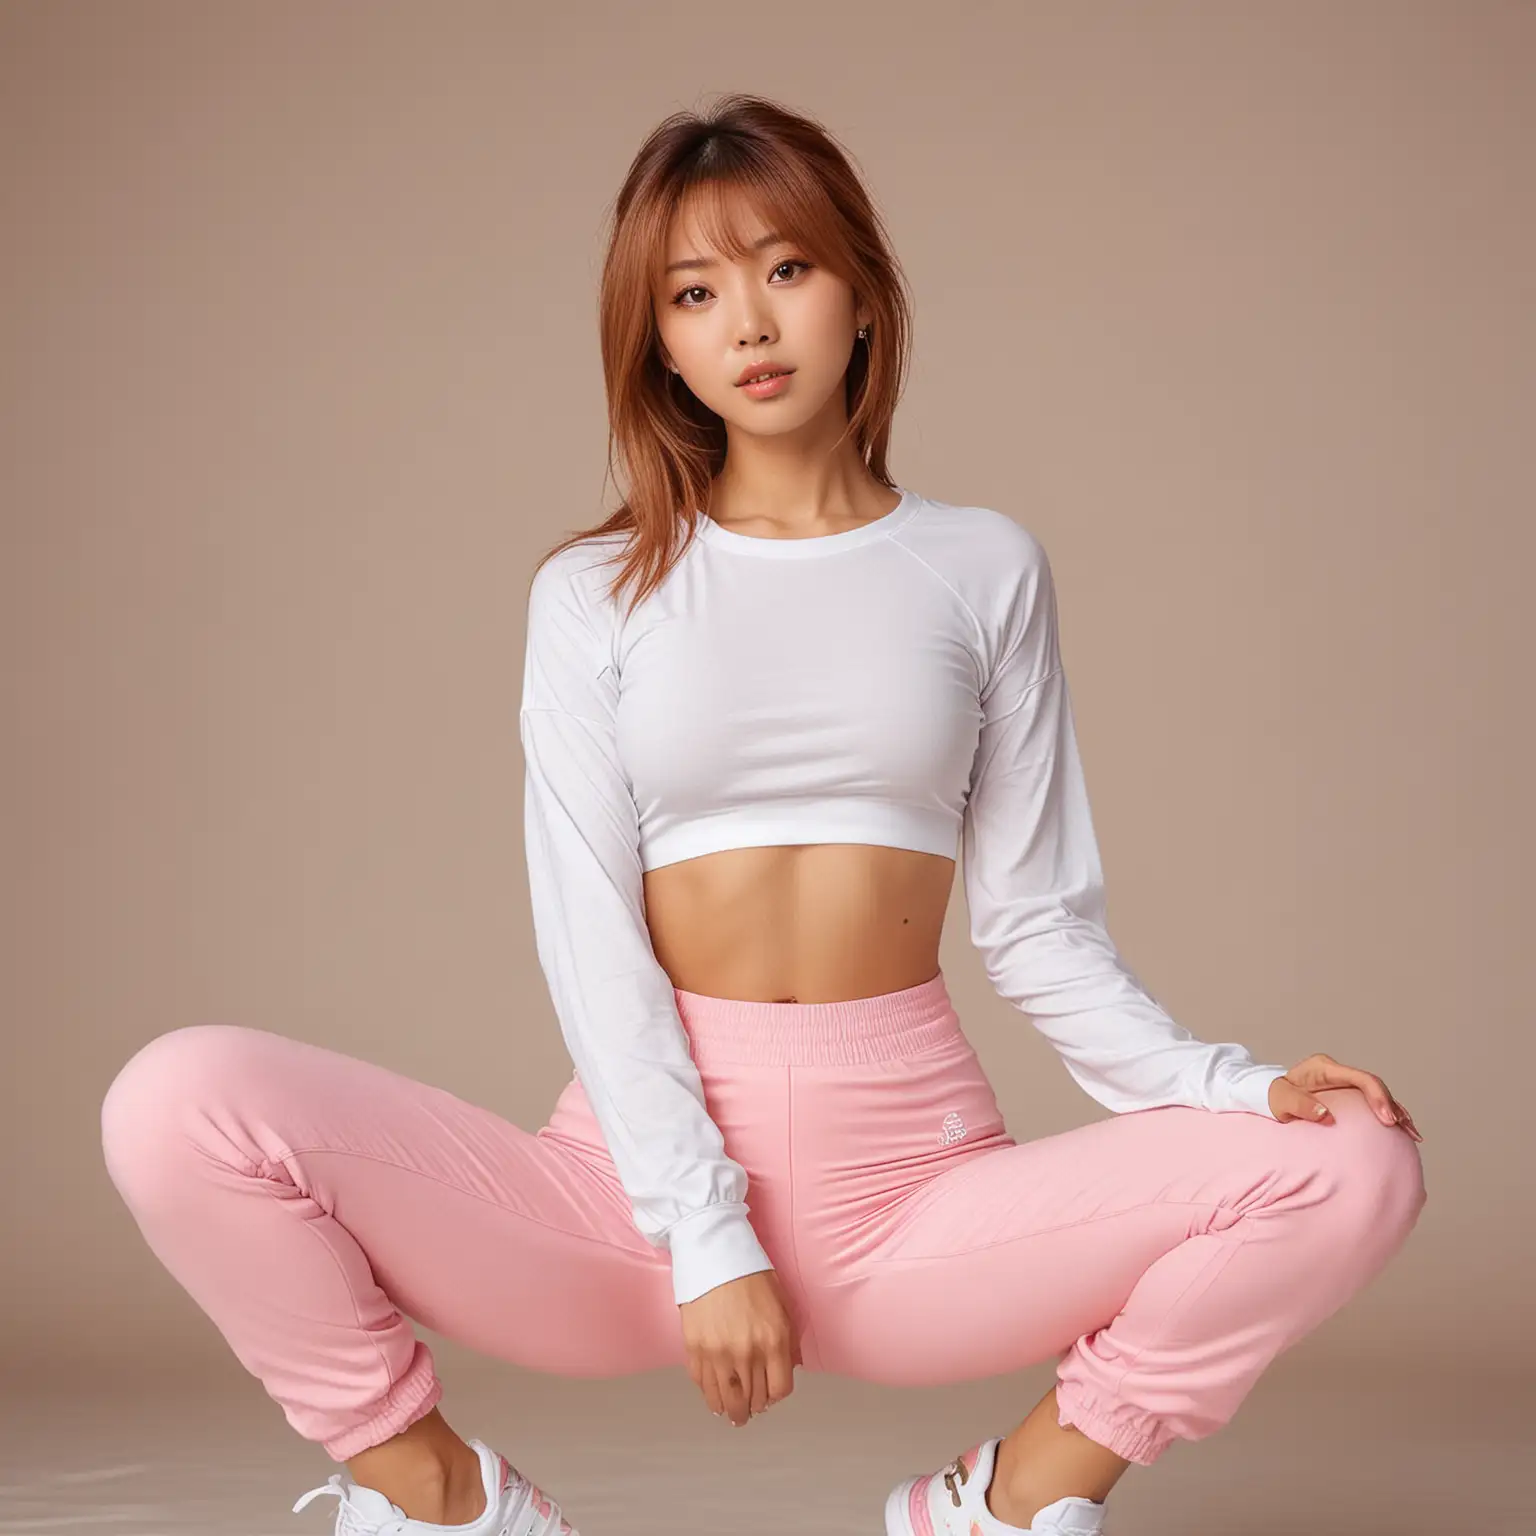 Stylish Japanese Girl Posing in Casual White and Pink Ensemble